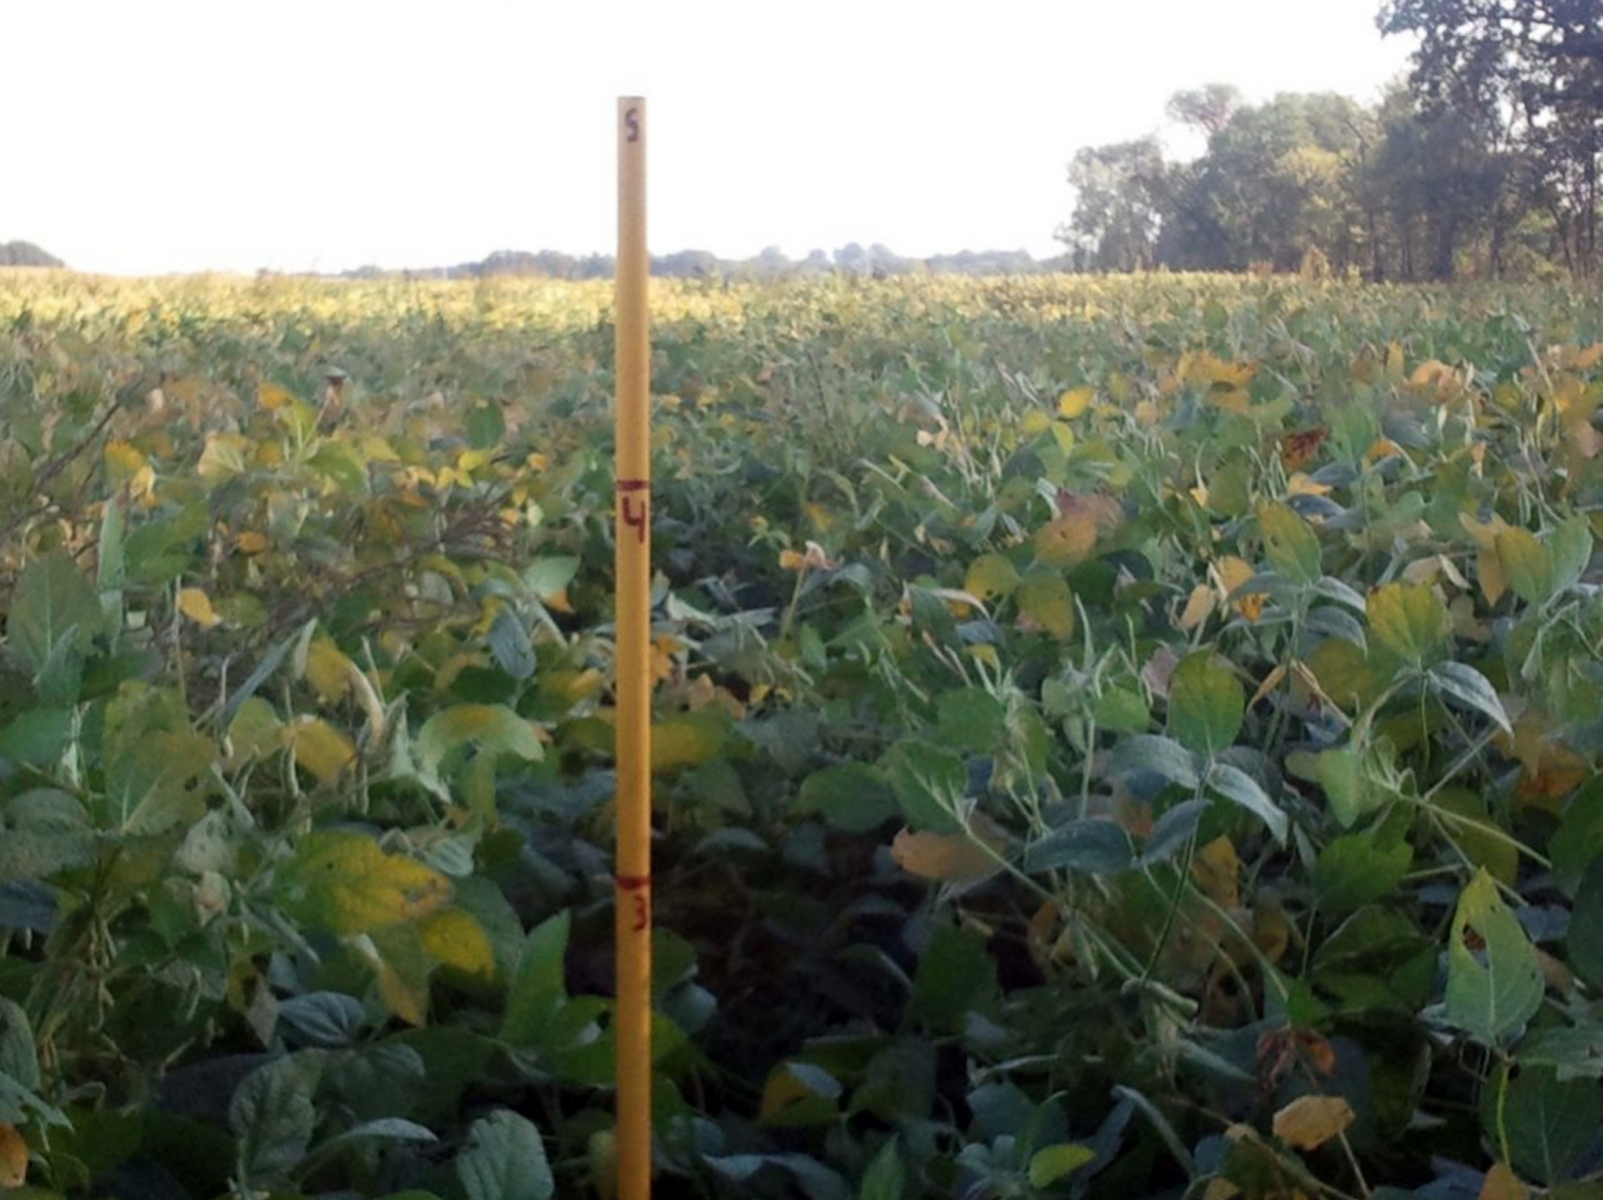 Blue Gold™ Soy is 18” taller than “normal protocol” sprayed crop! Only a couple months along and with only three applications, and in the middle of a drought, these soybeans are well on their way to passing 4' tall!